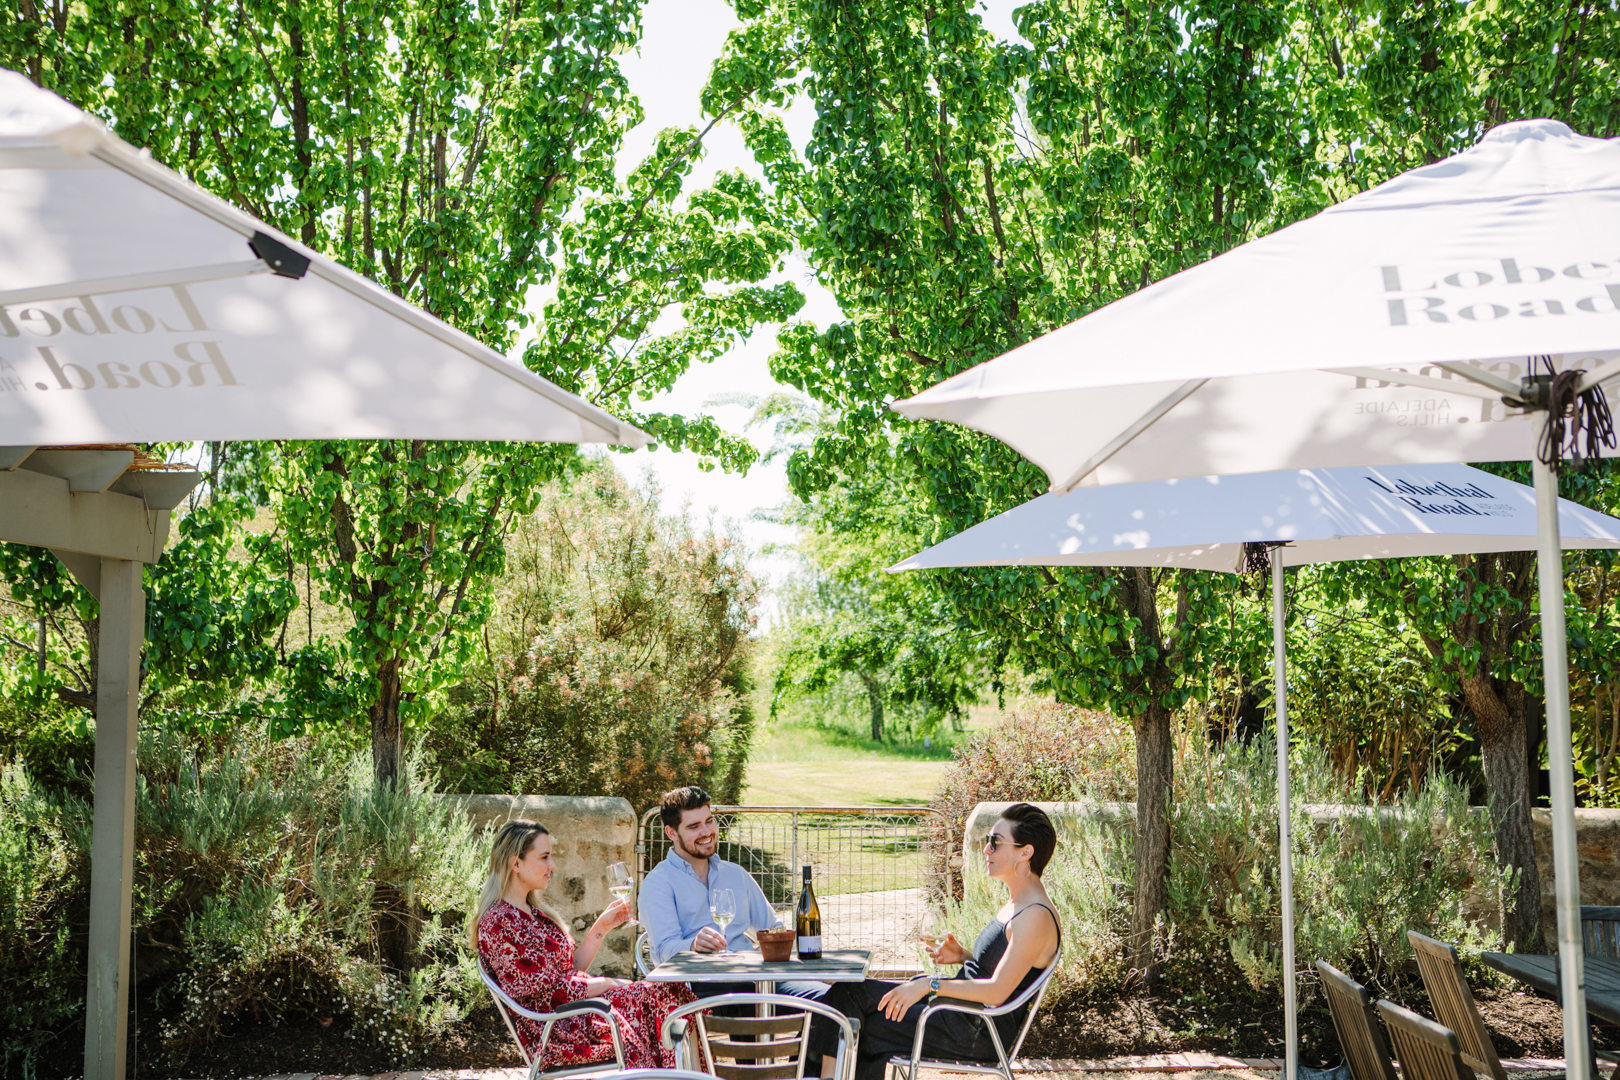 WIN the ultimate weekend getaway in the Adelaide Hills thanks to Lobethal Road Wines